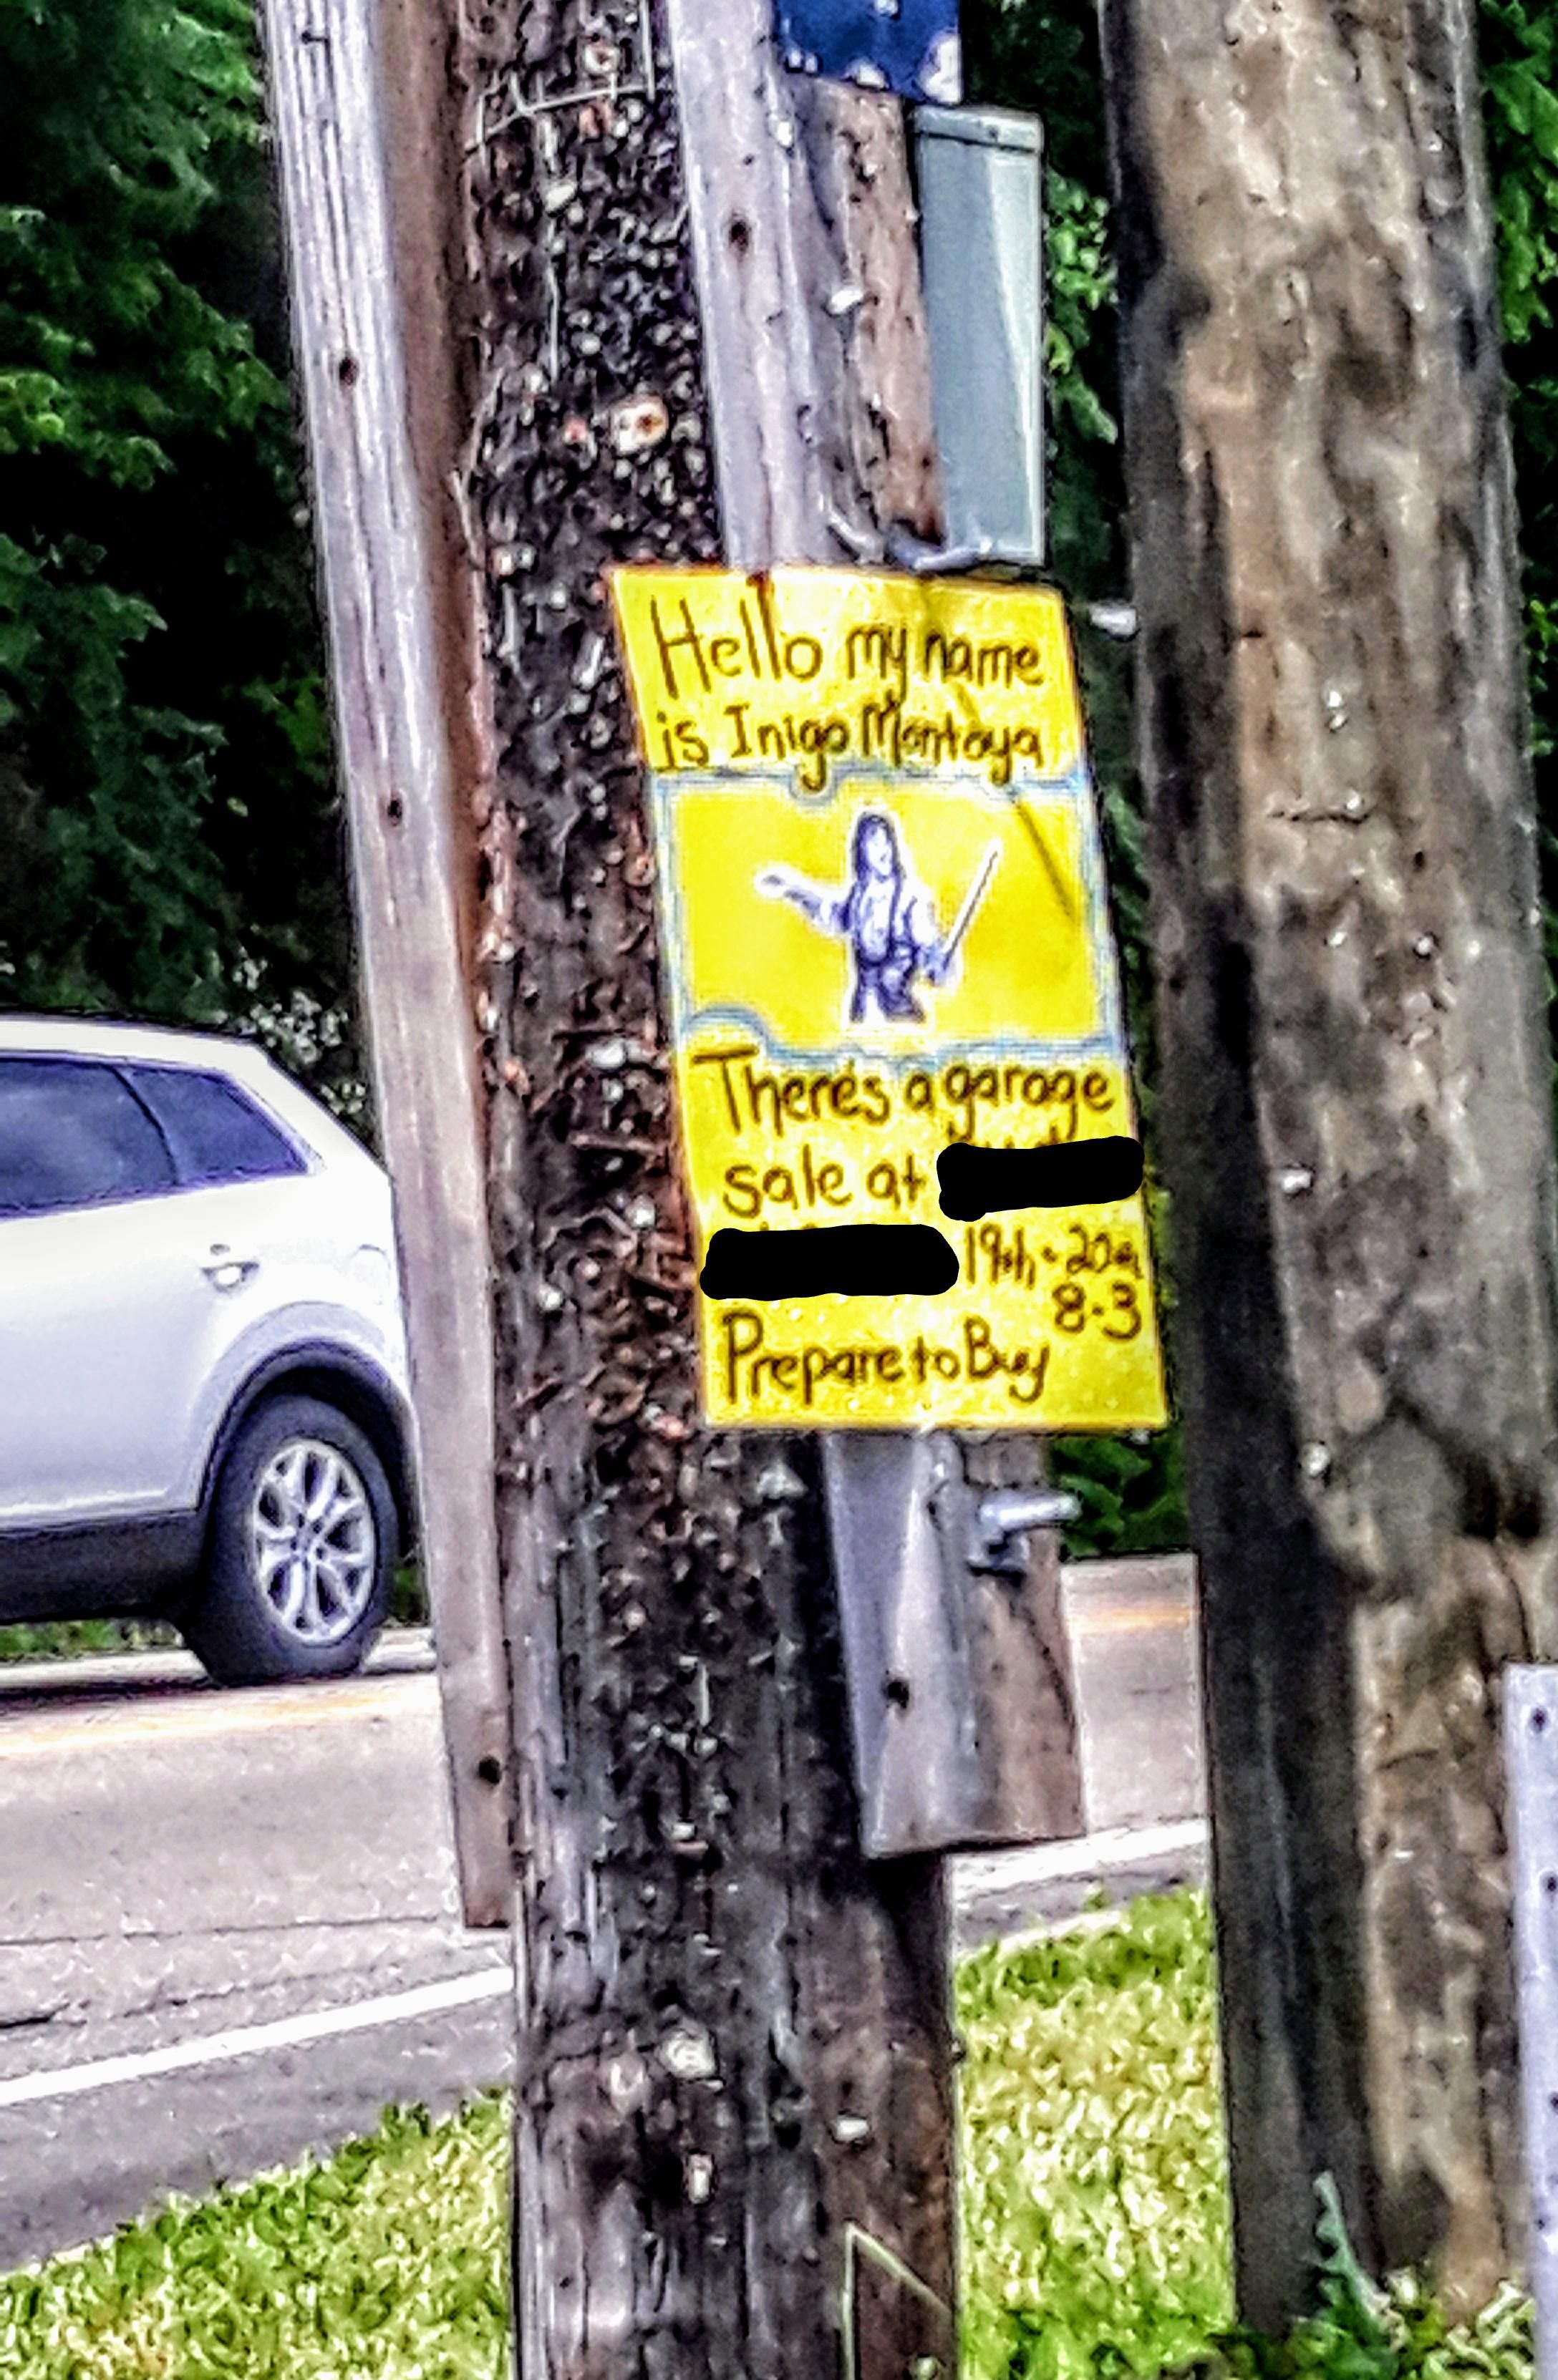 Saw this glorious sign while driving home. These people know how to garage sale.